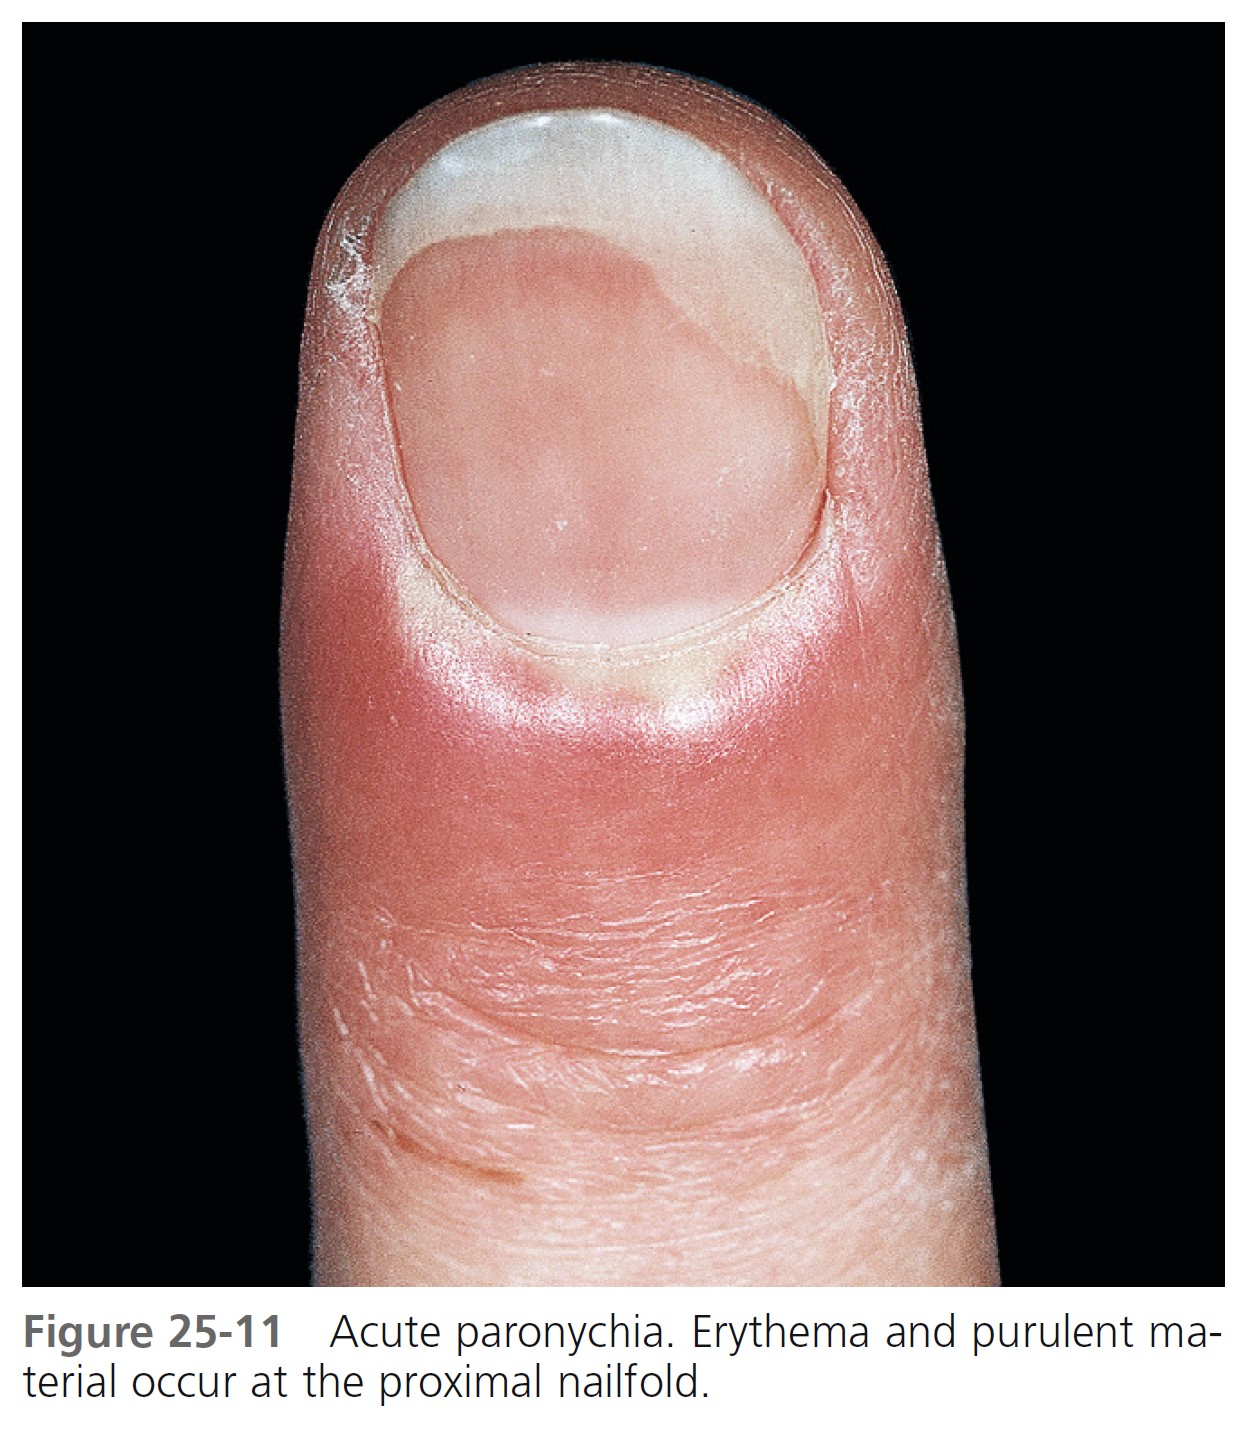 Shoreline Nails: A New Nail Sign of SARS-CoV-2 Infection - JDDonline -  Journal of Drugs in Dermatology